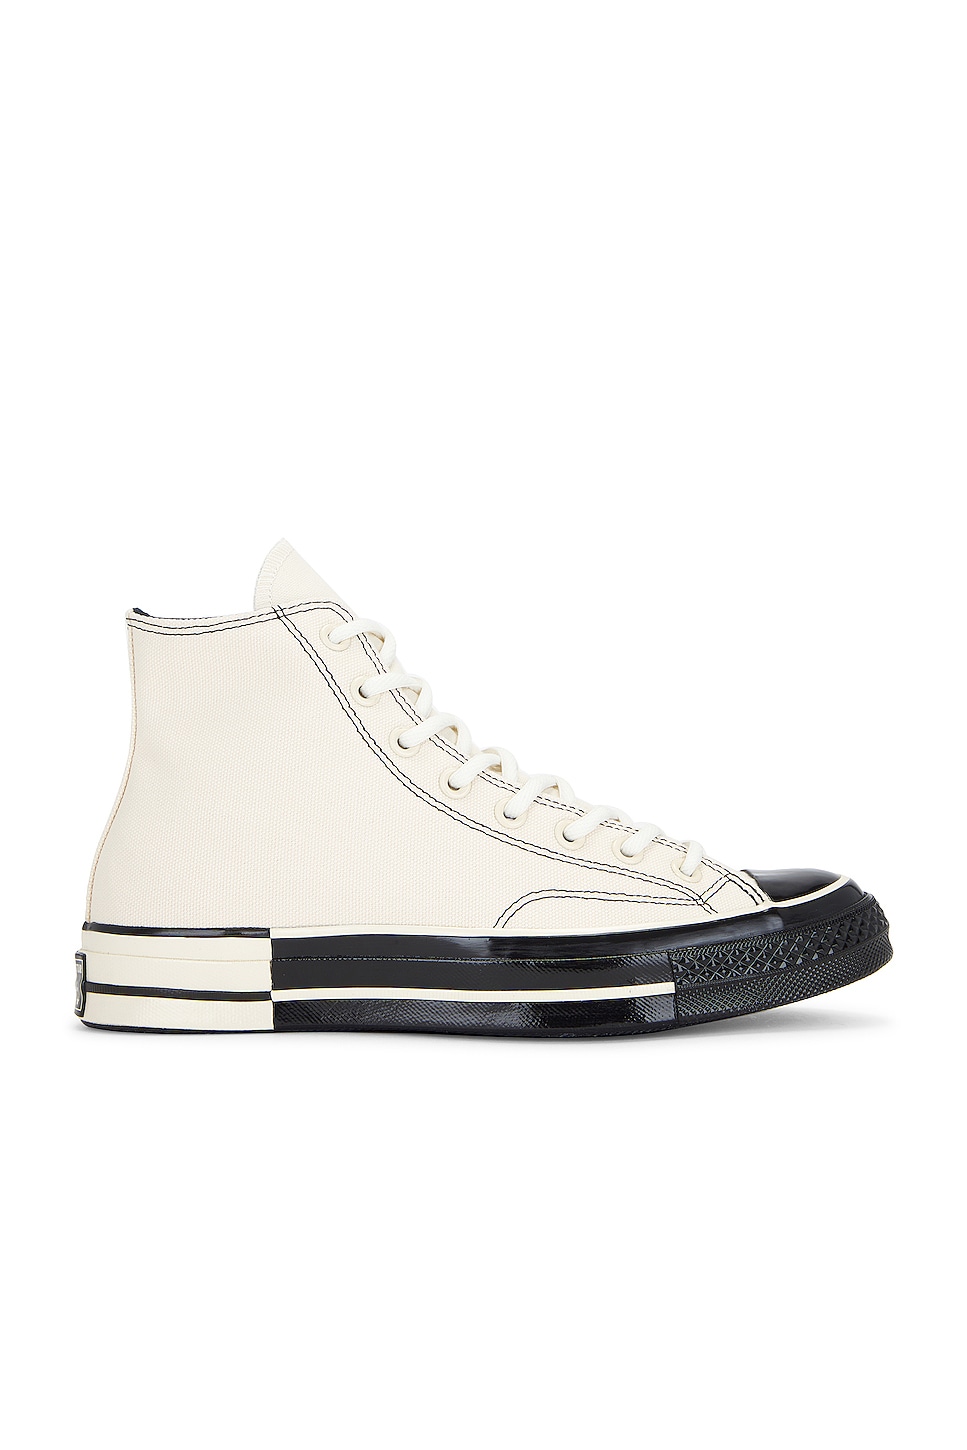 Image 1 of Converse Chuck 70 Black & White in Natural Ivory, Black, & Vintage White